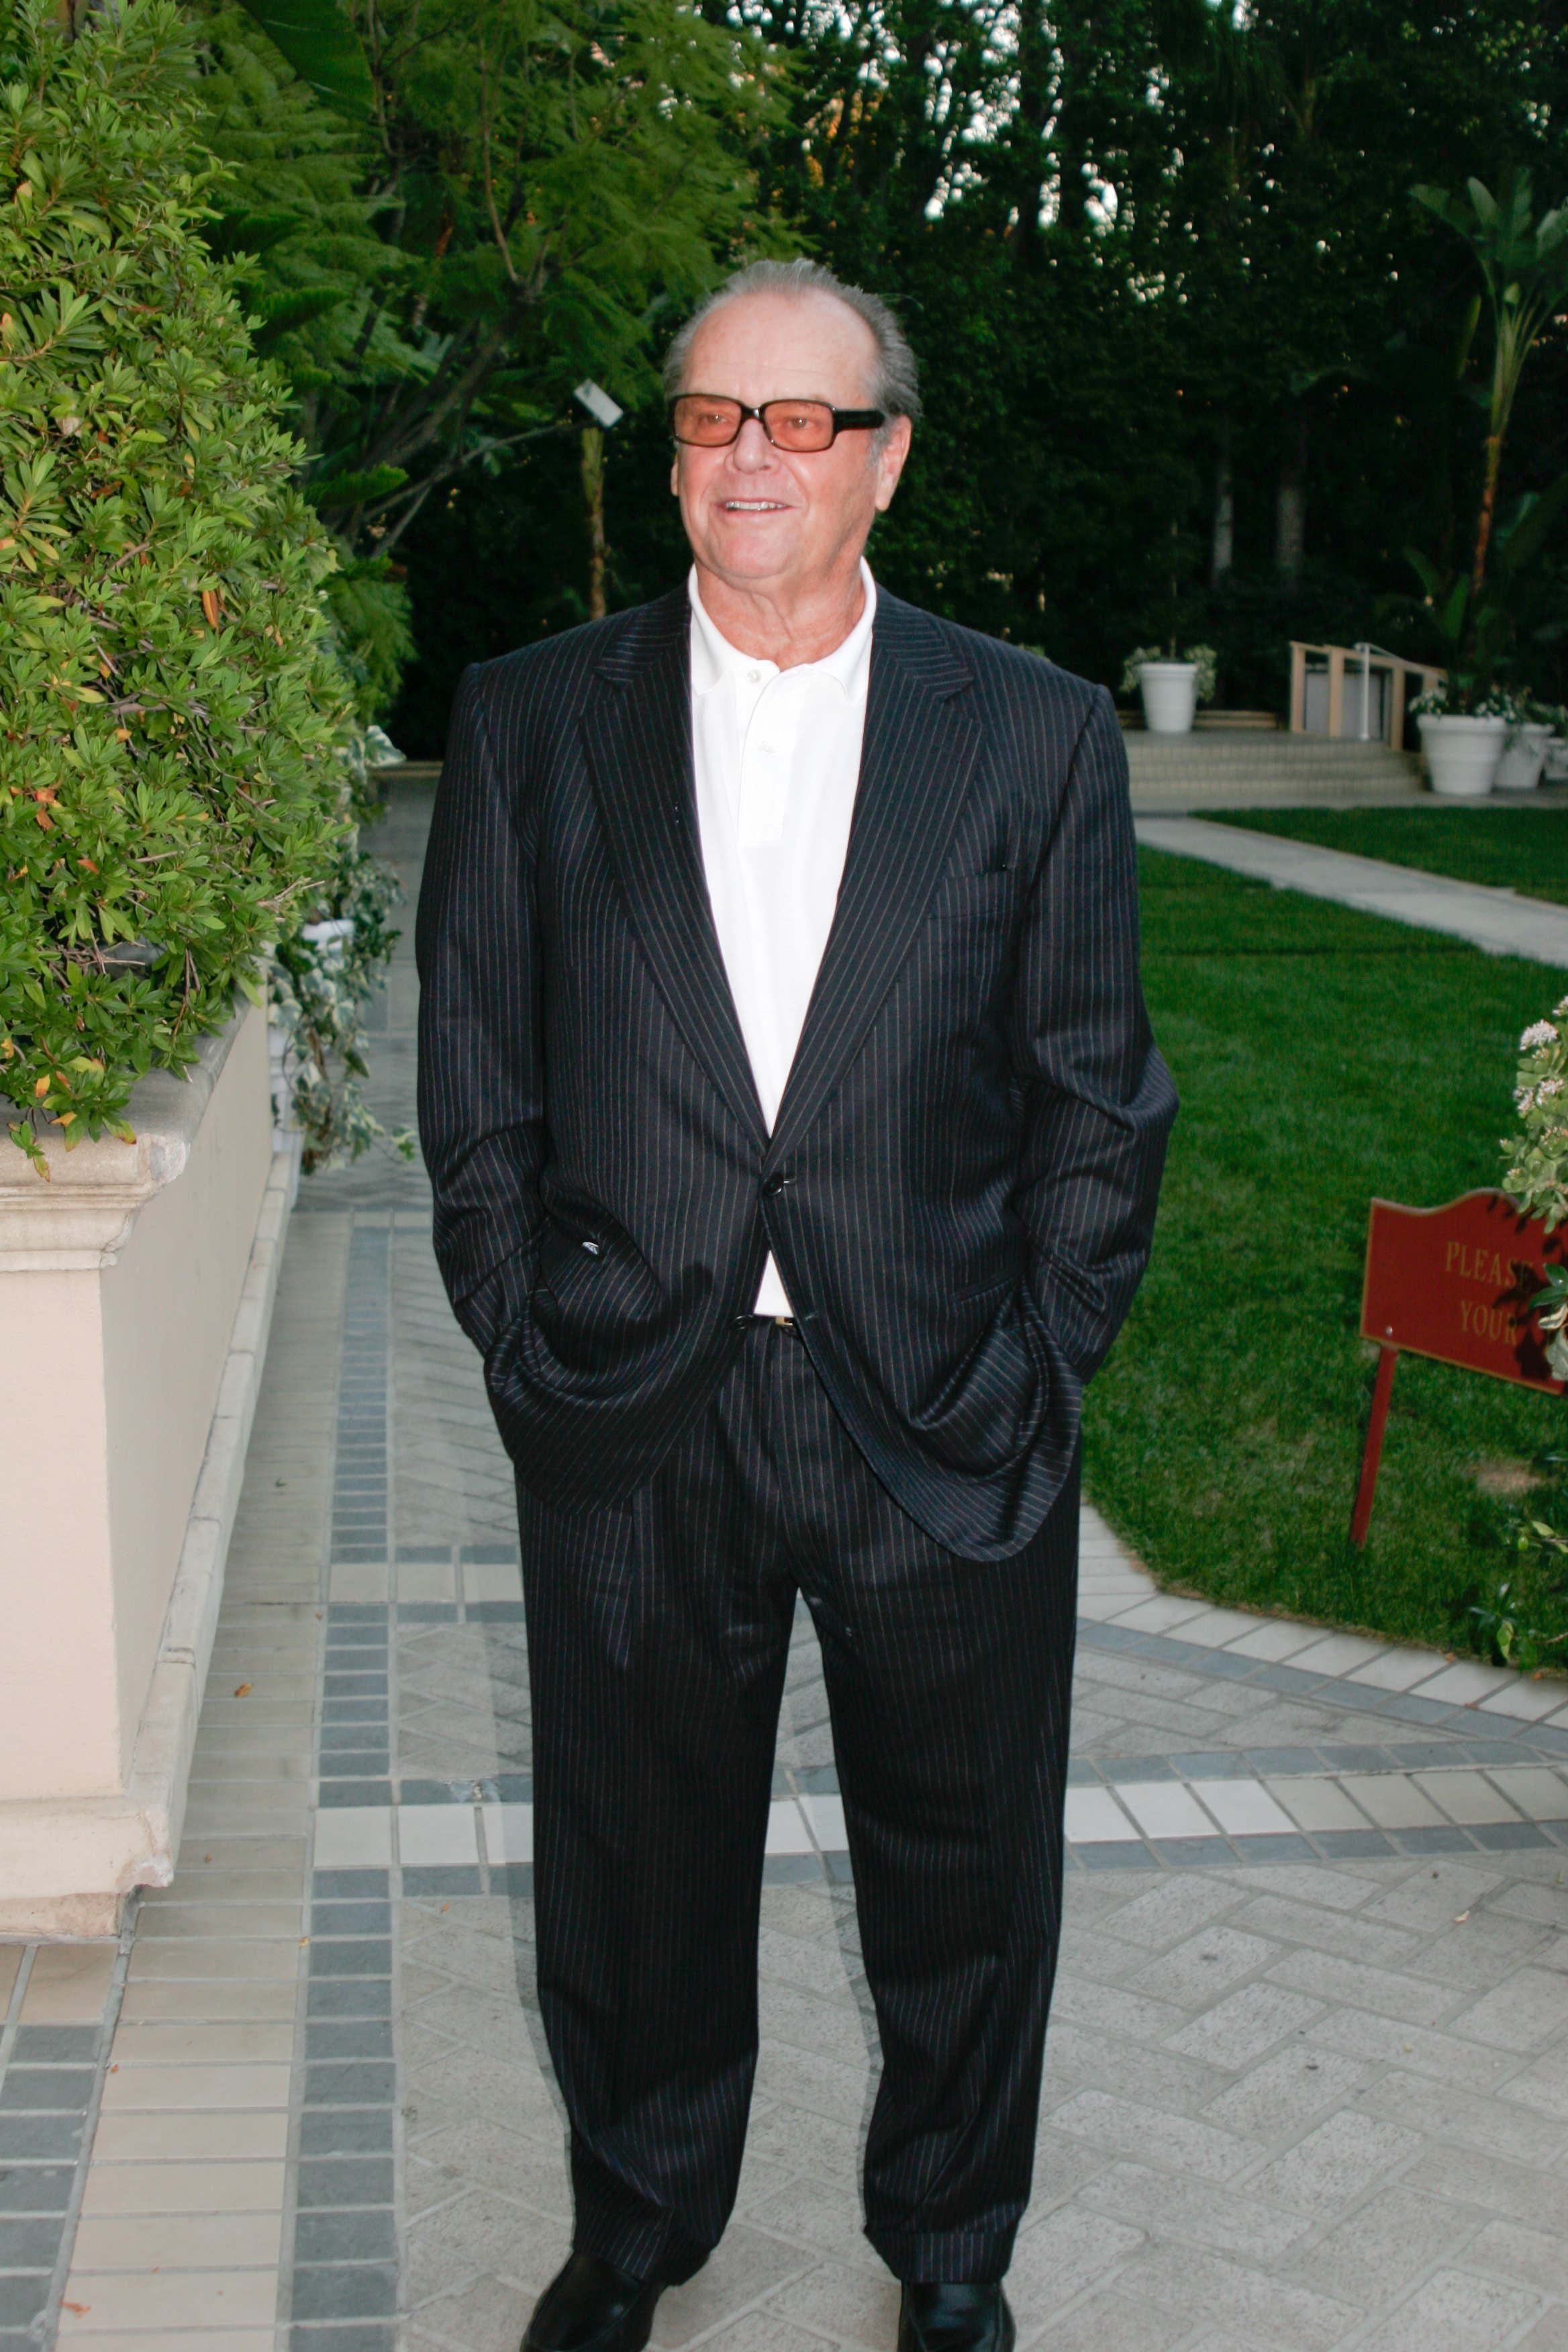 Jack Nicholson in California in 2007 | Source: Getty Images